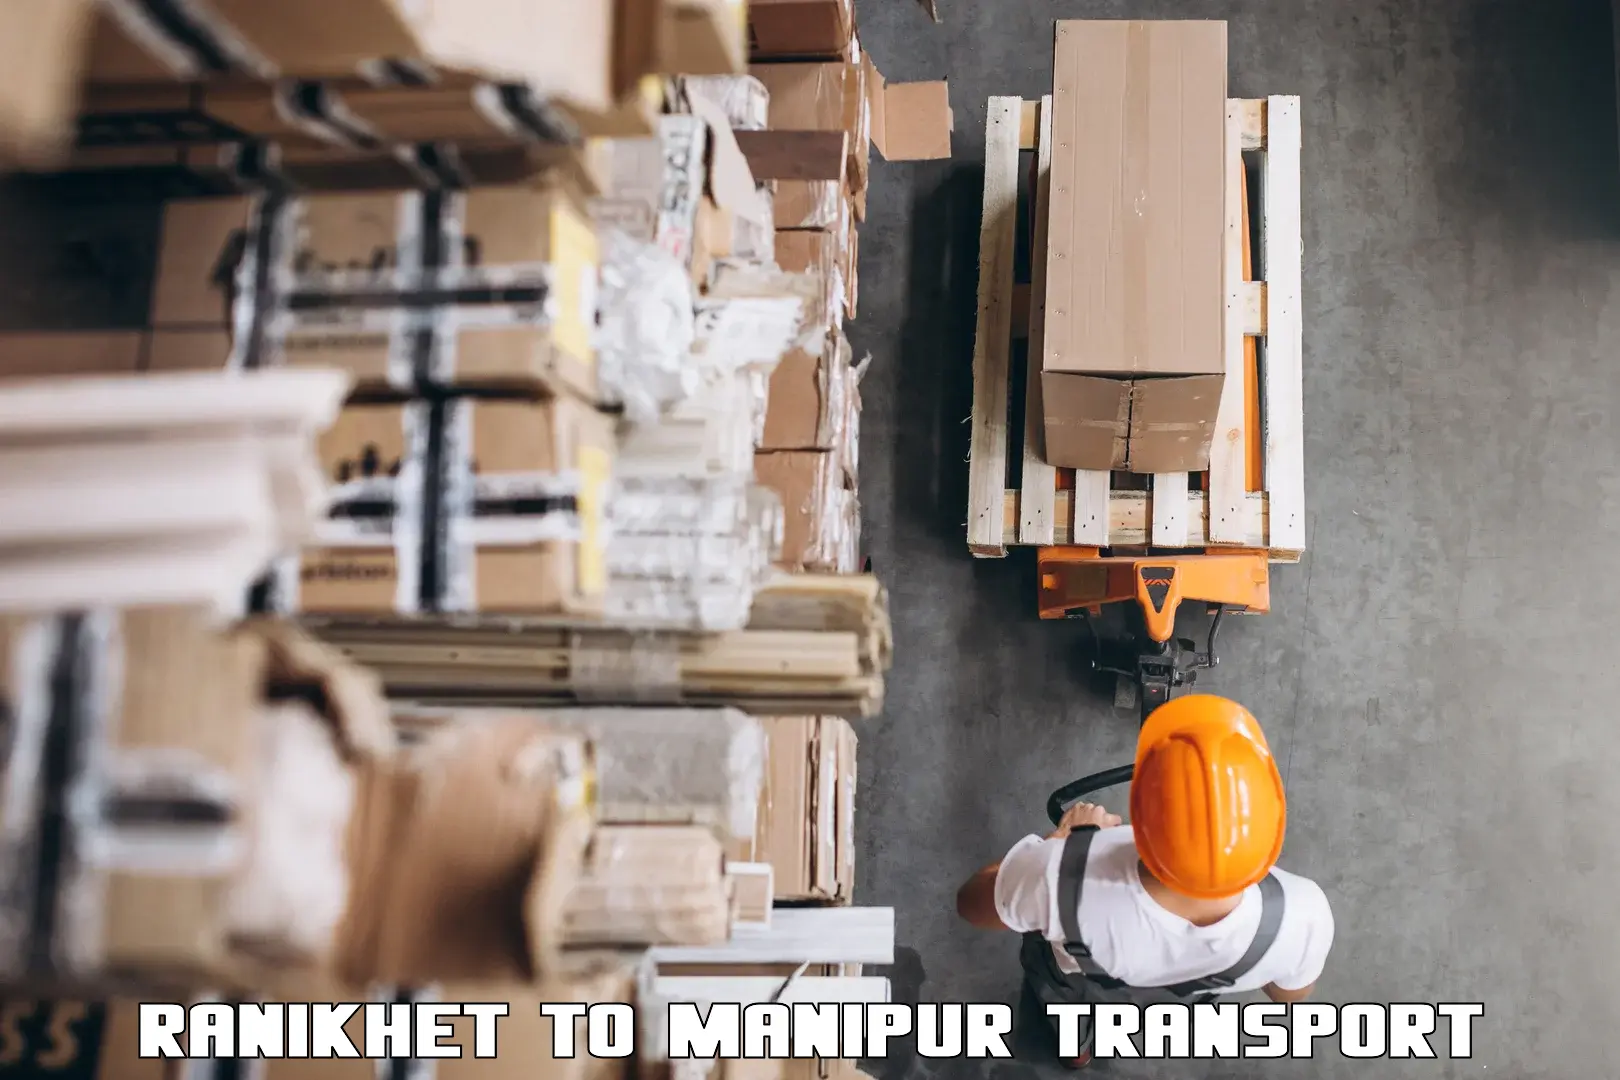 Container transport service Ranikhet to Manipur